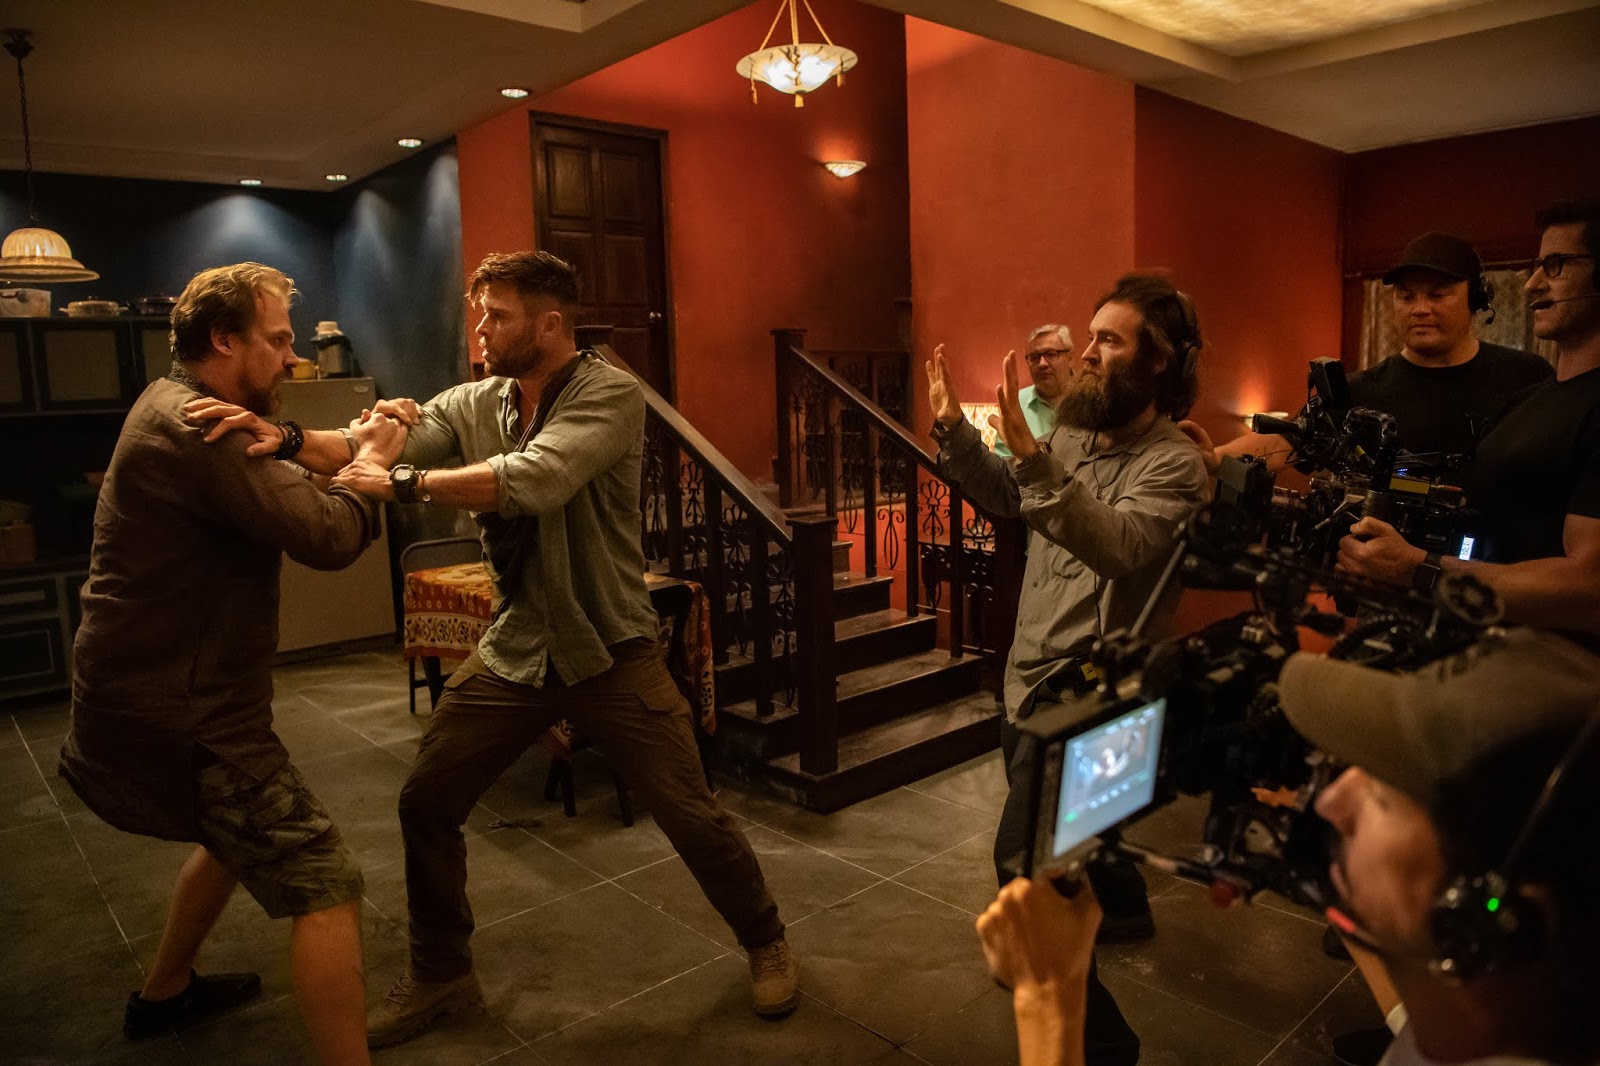 Action Film EXTRACTION Gets First-Look Images and Official Netflix Release Date of April 24, 2020